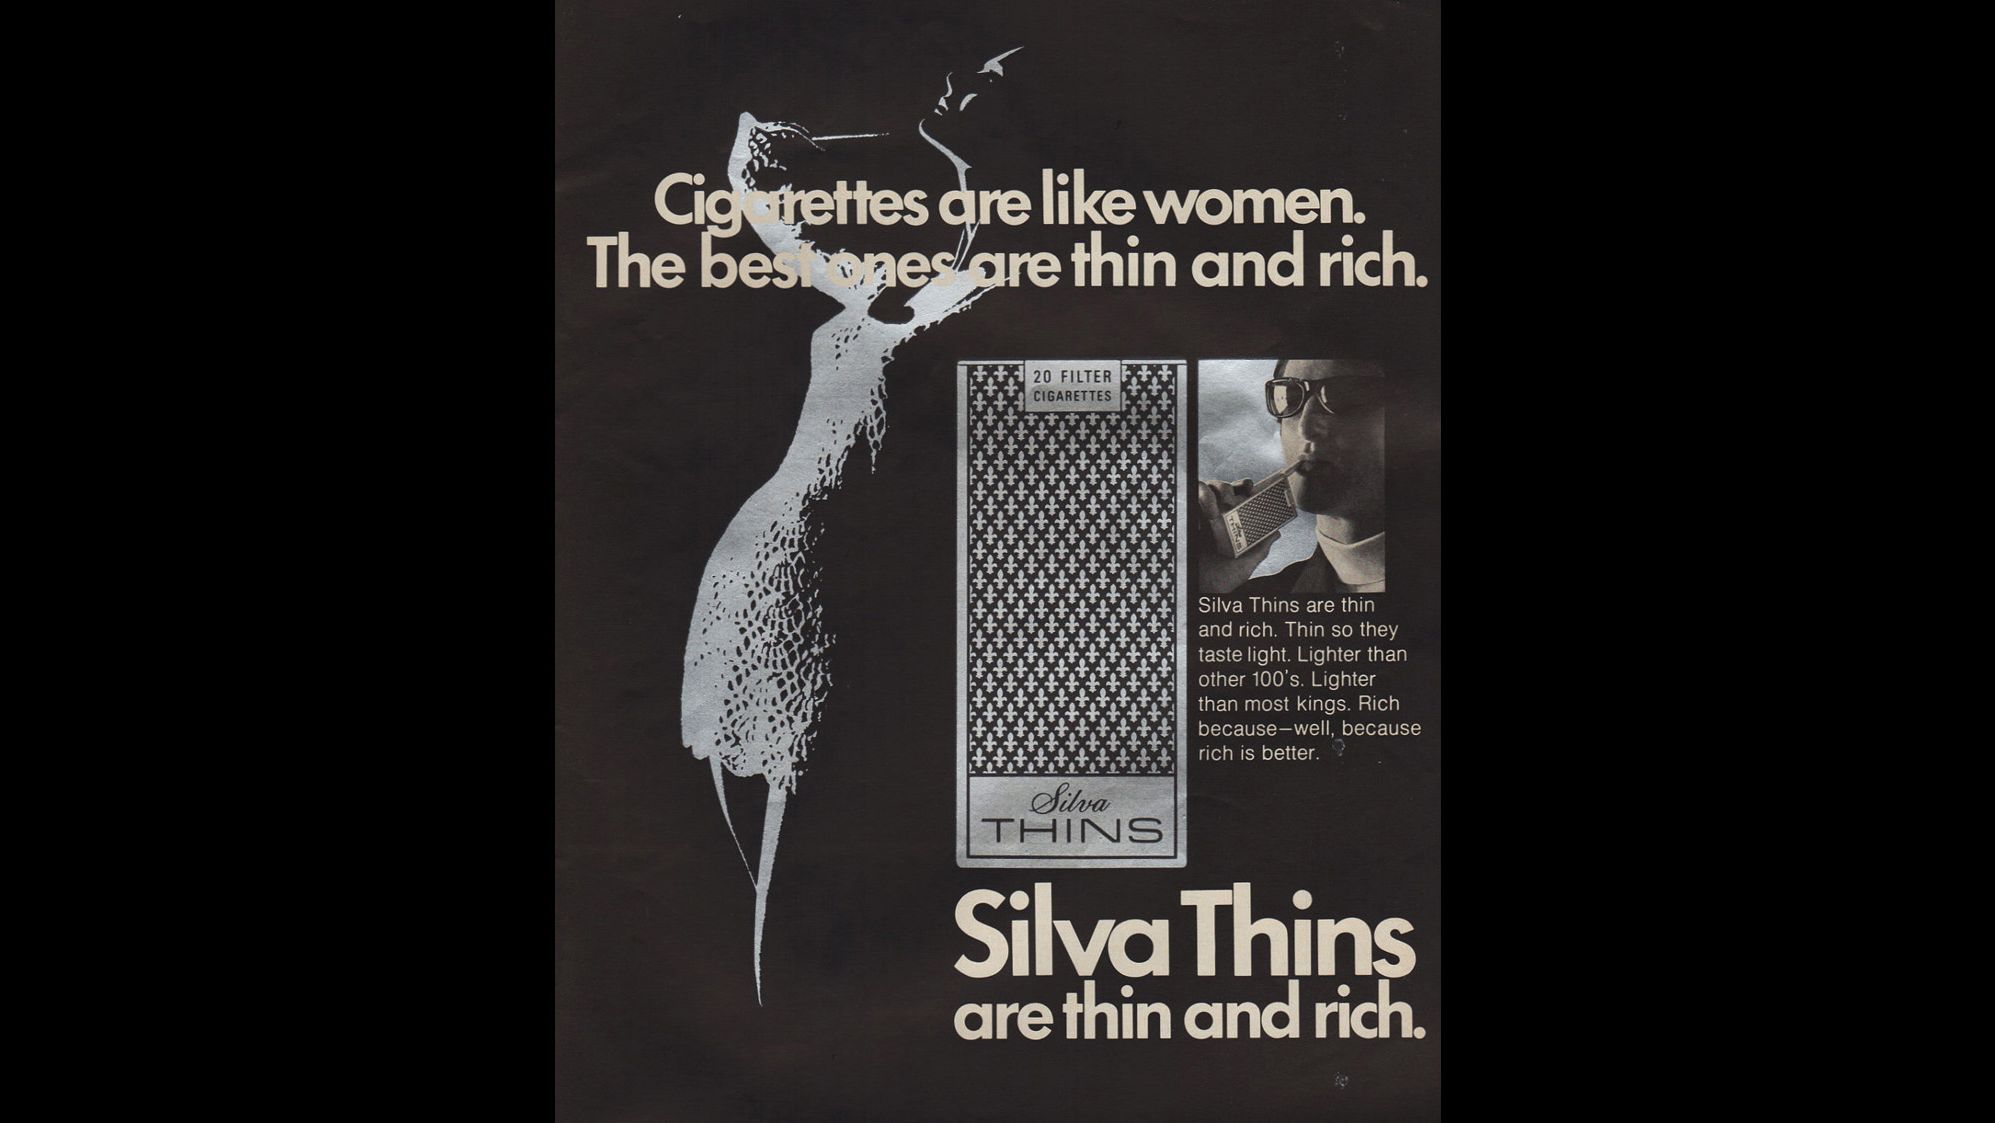 This 1970 ad for Silva Thins cigarettes was controversial for its blatant sexism against women.